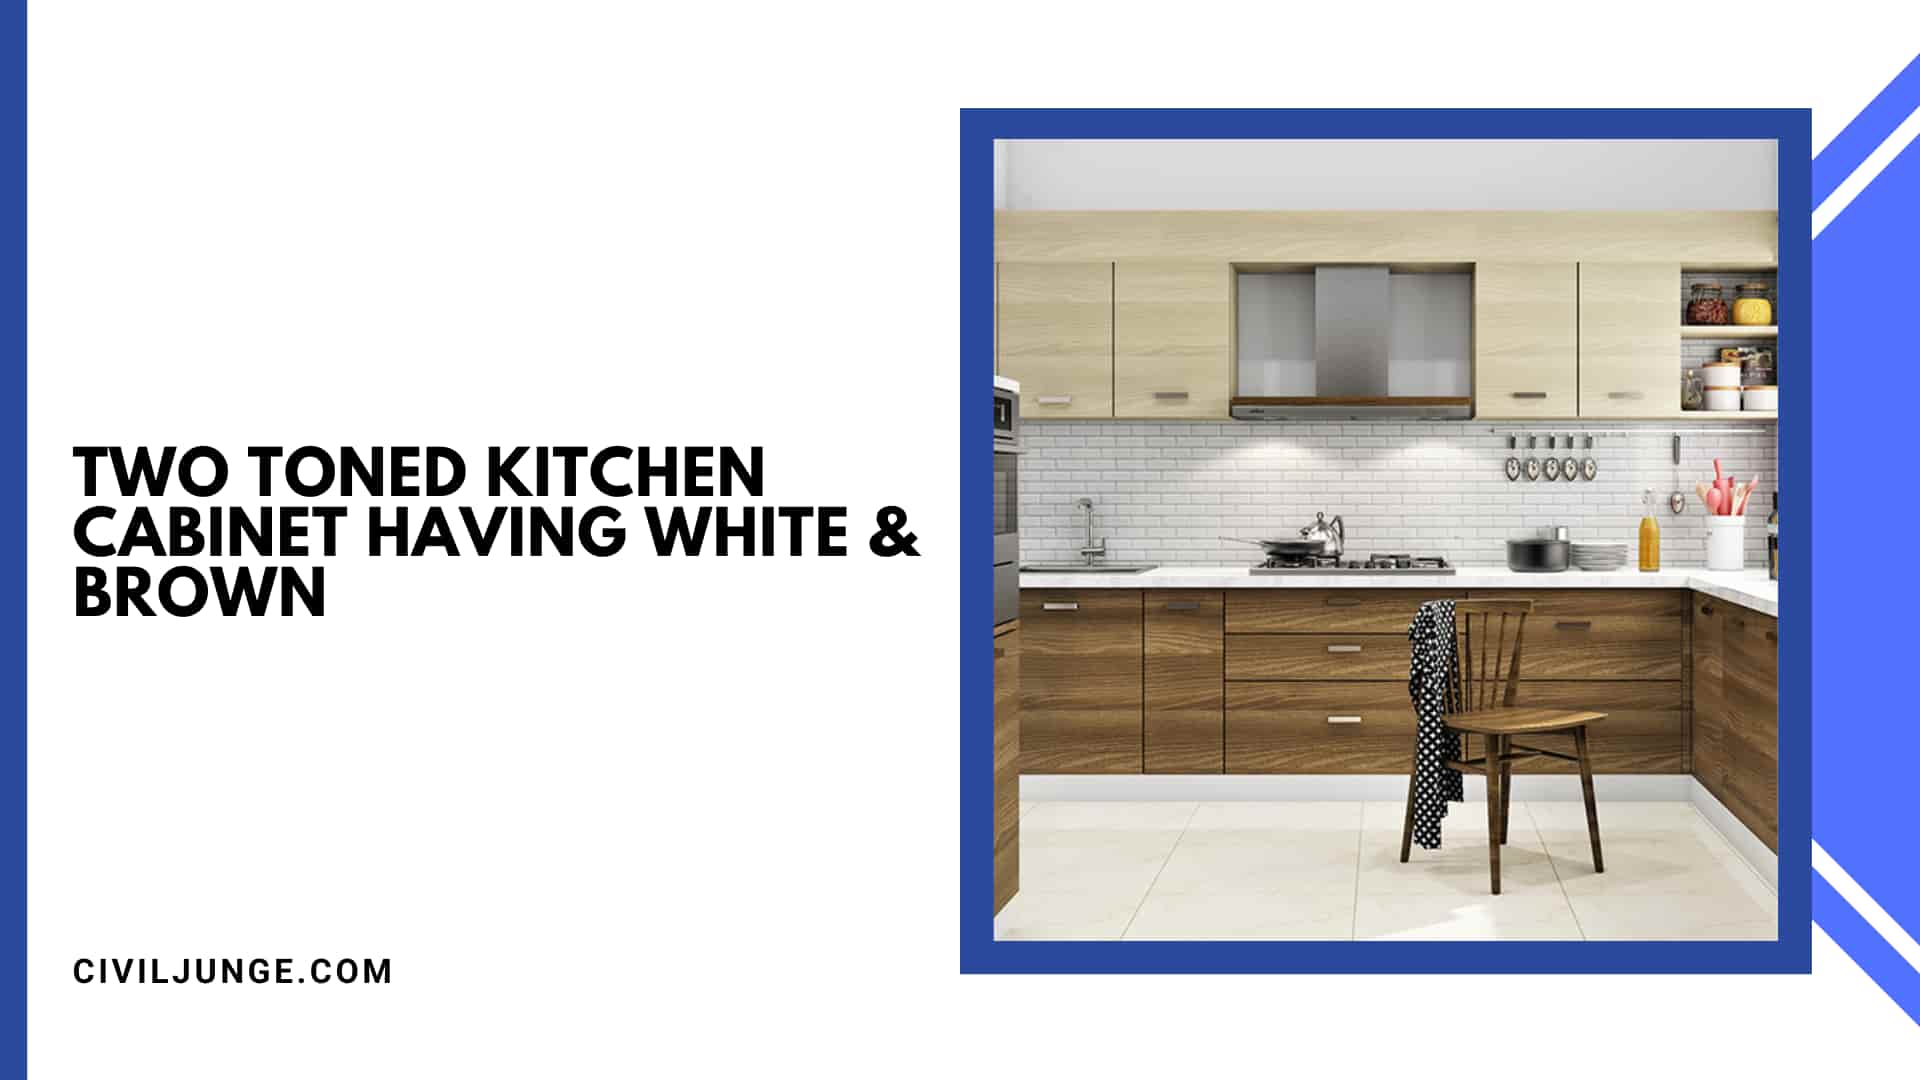 Two Toned Kitchen Cabinet Having White & Brown